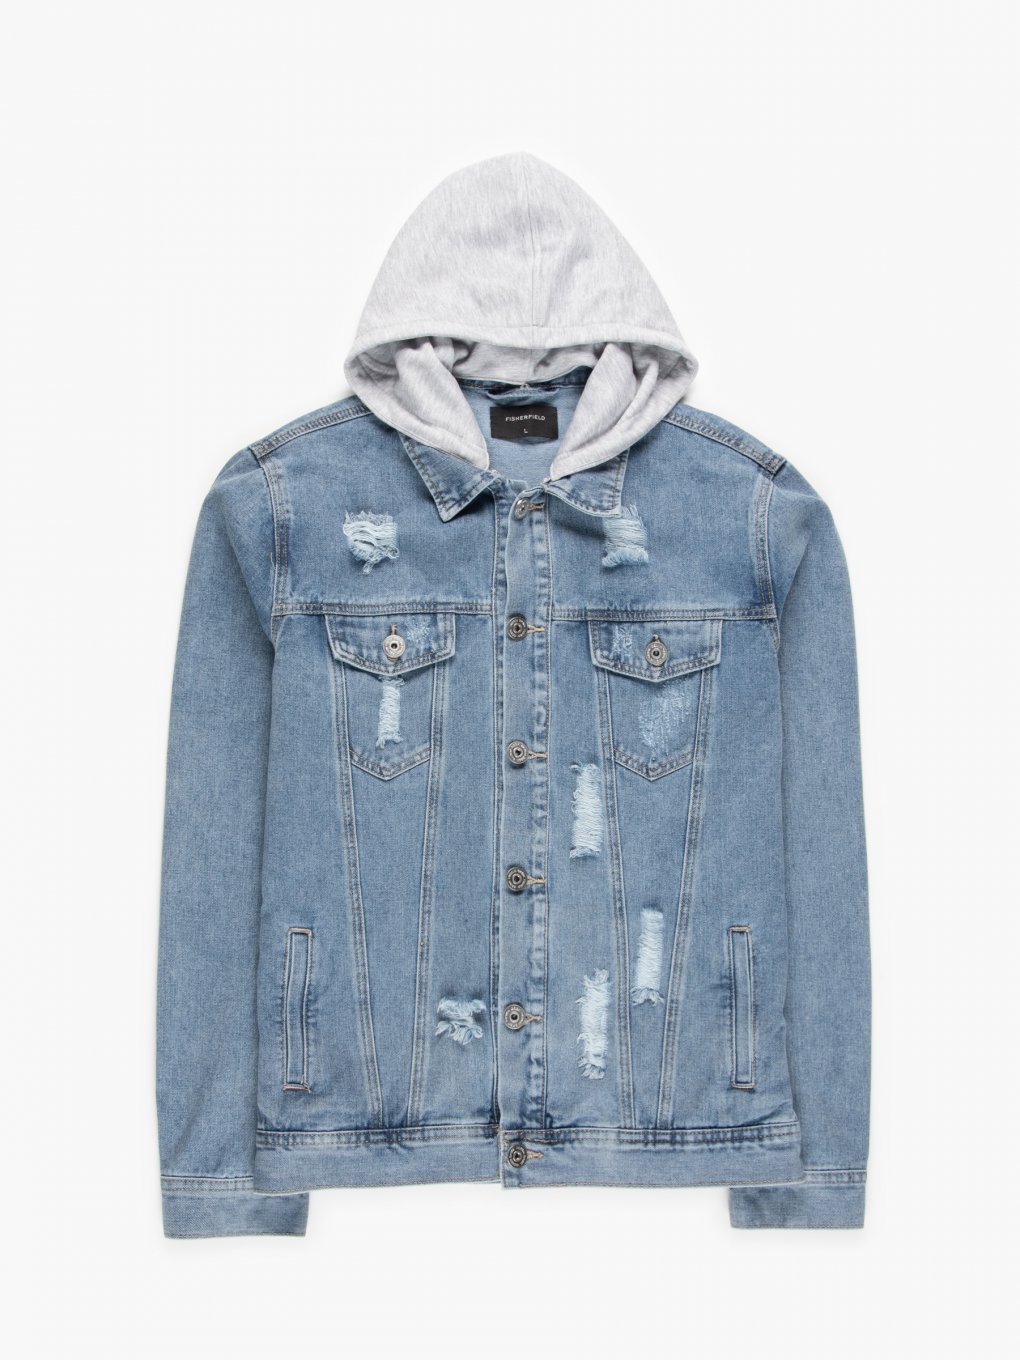 Denim jacket with removable hood